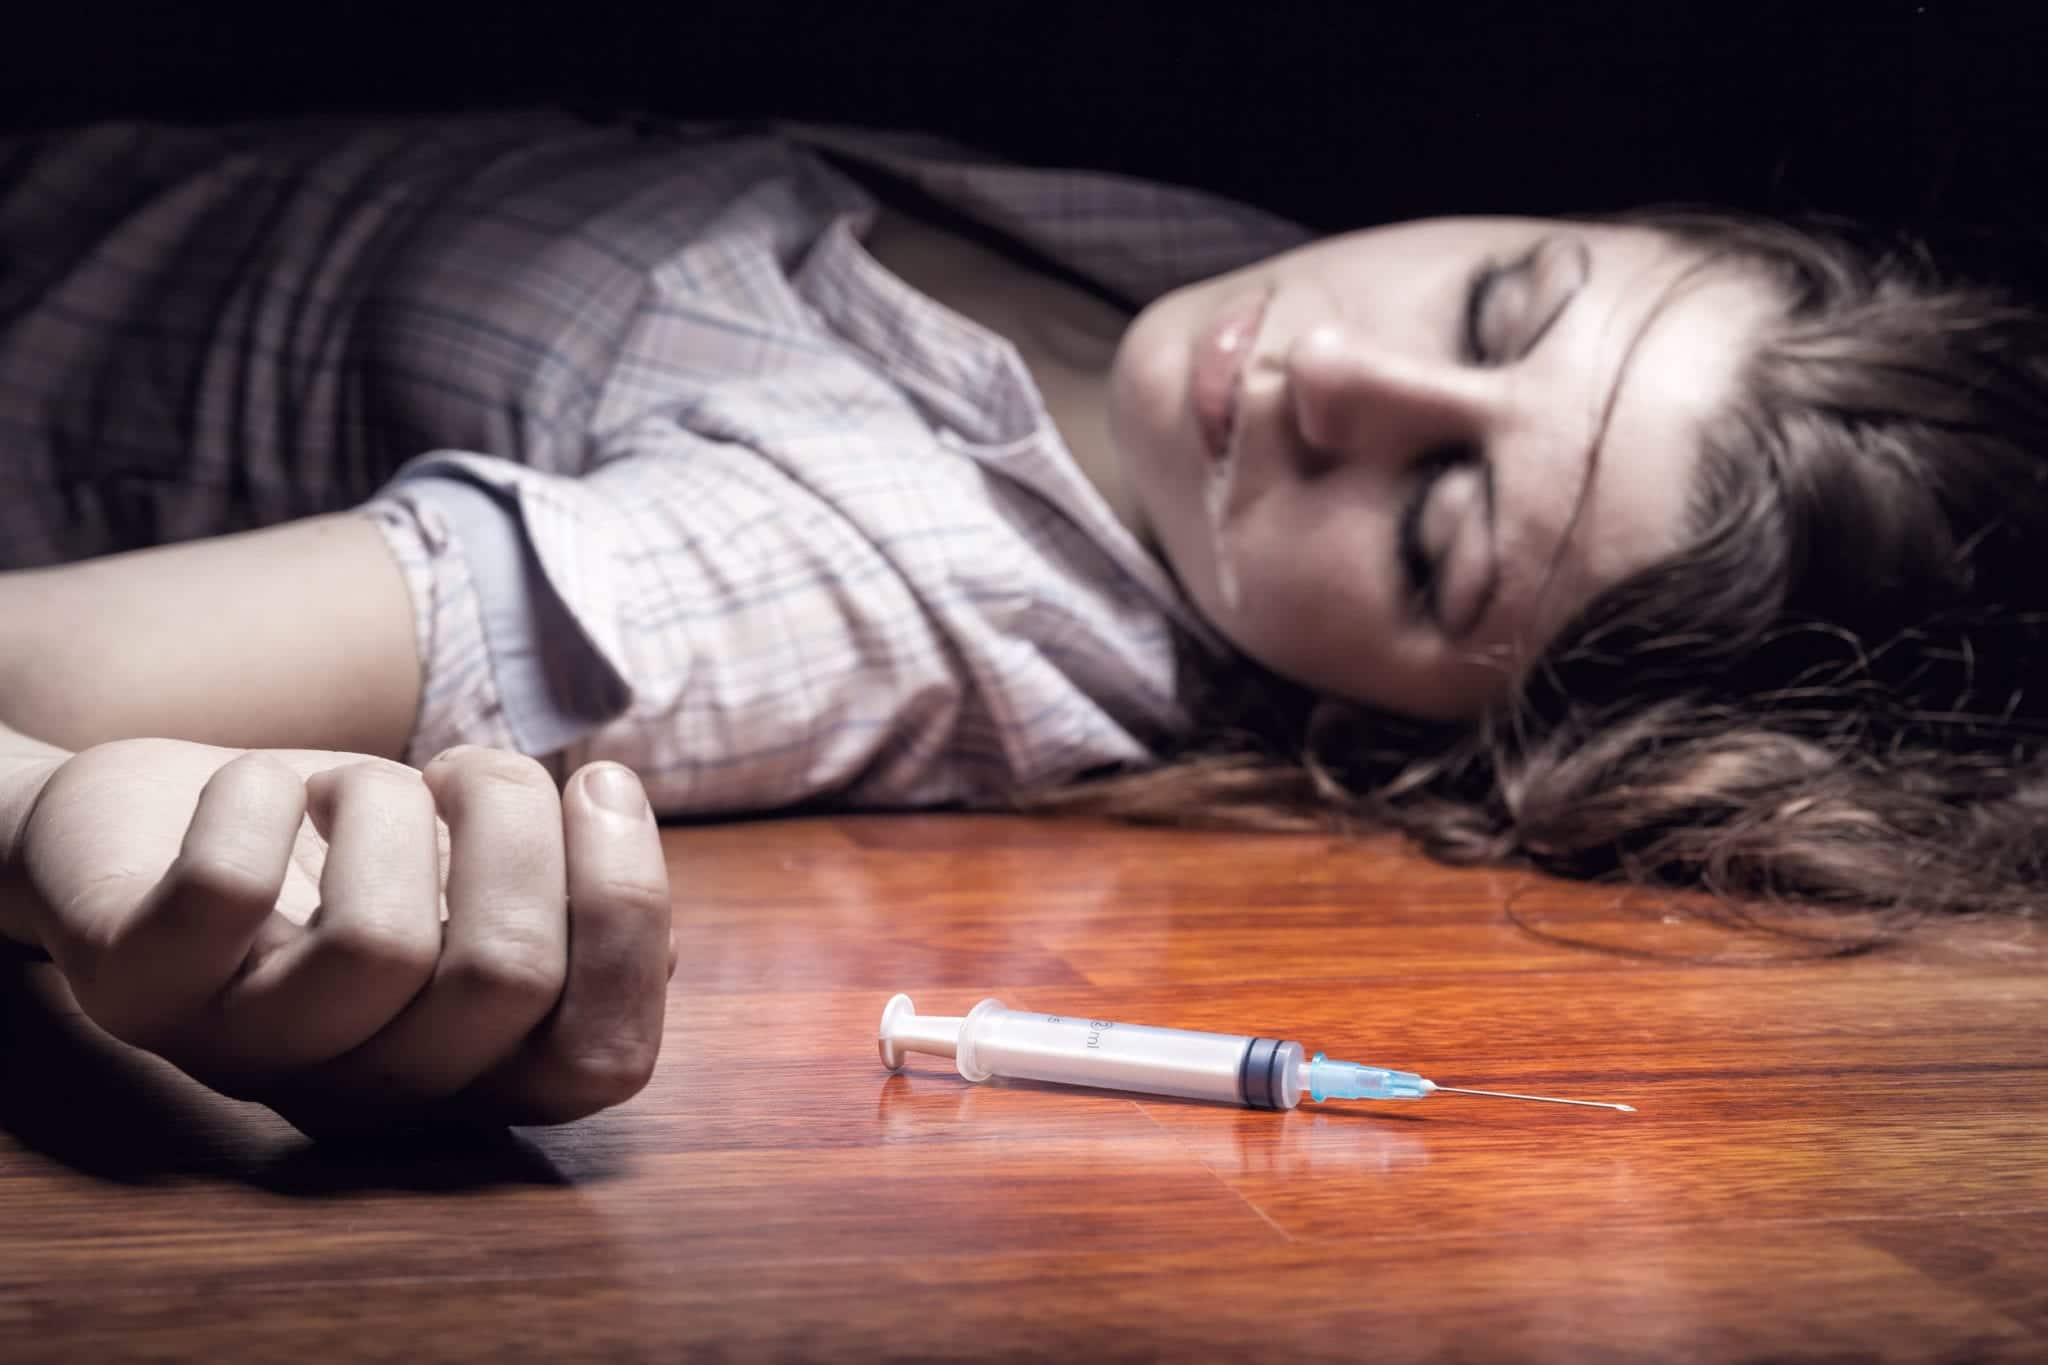 Need Help with an Overdose? Minnesota Won’t Prosecute You